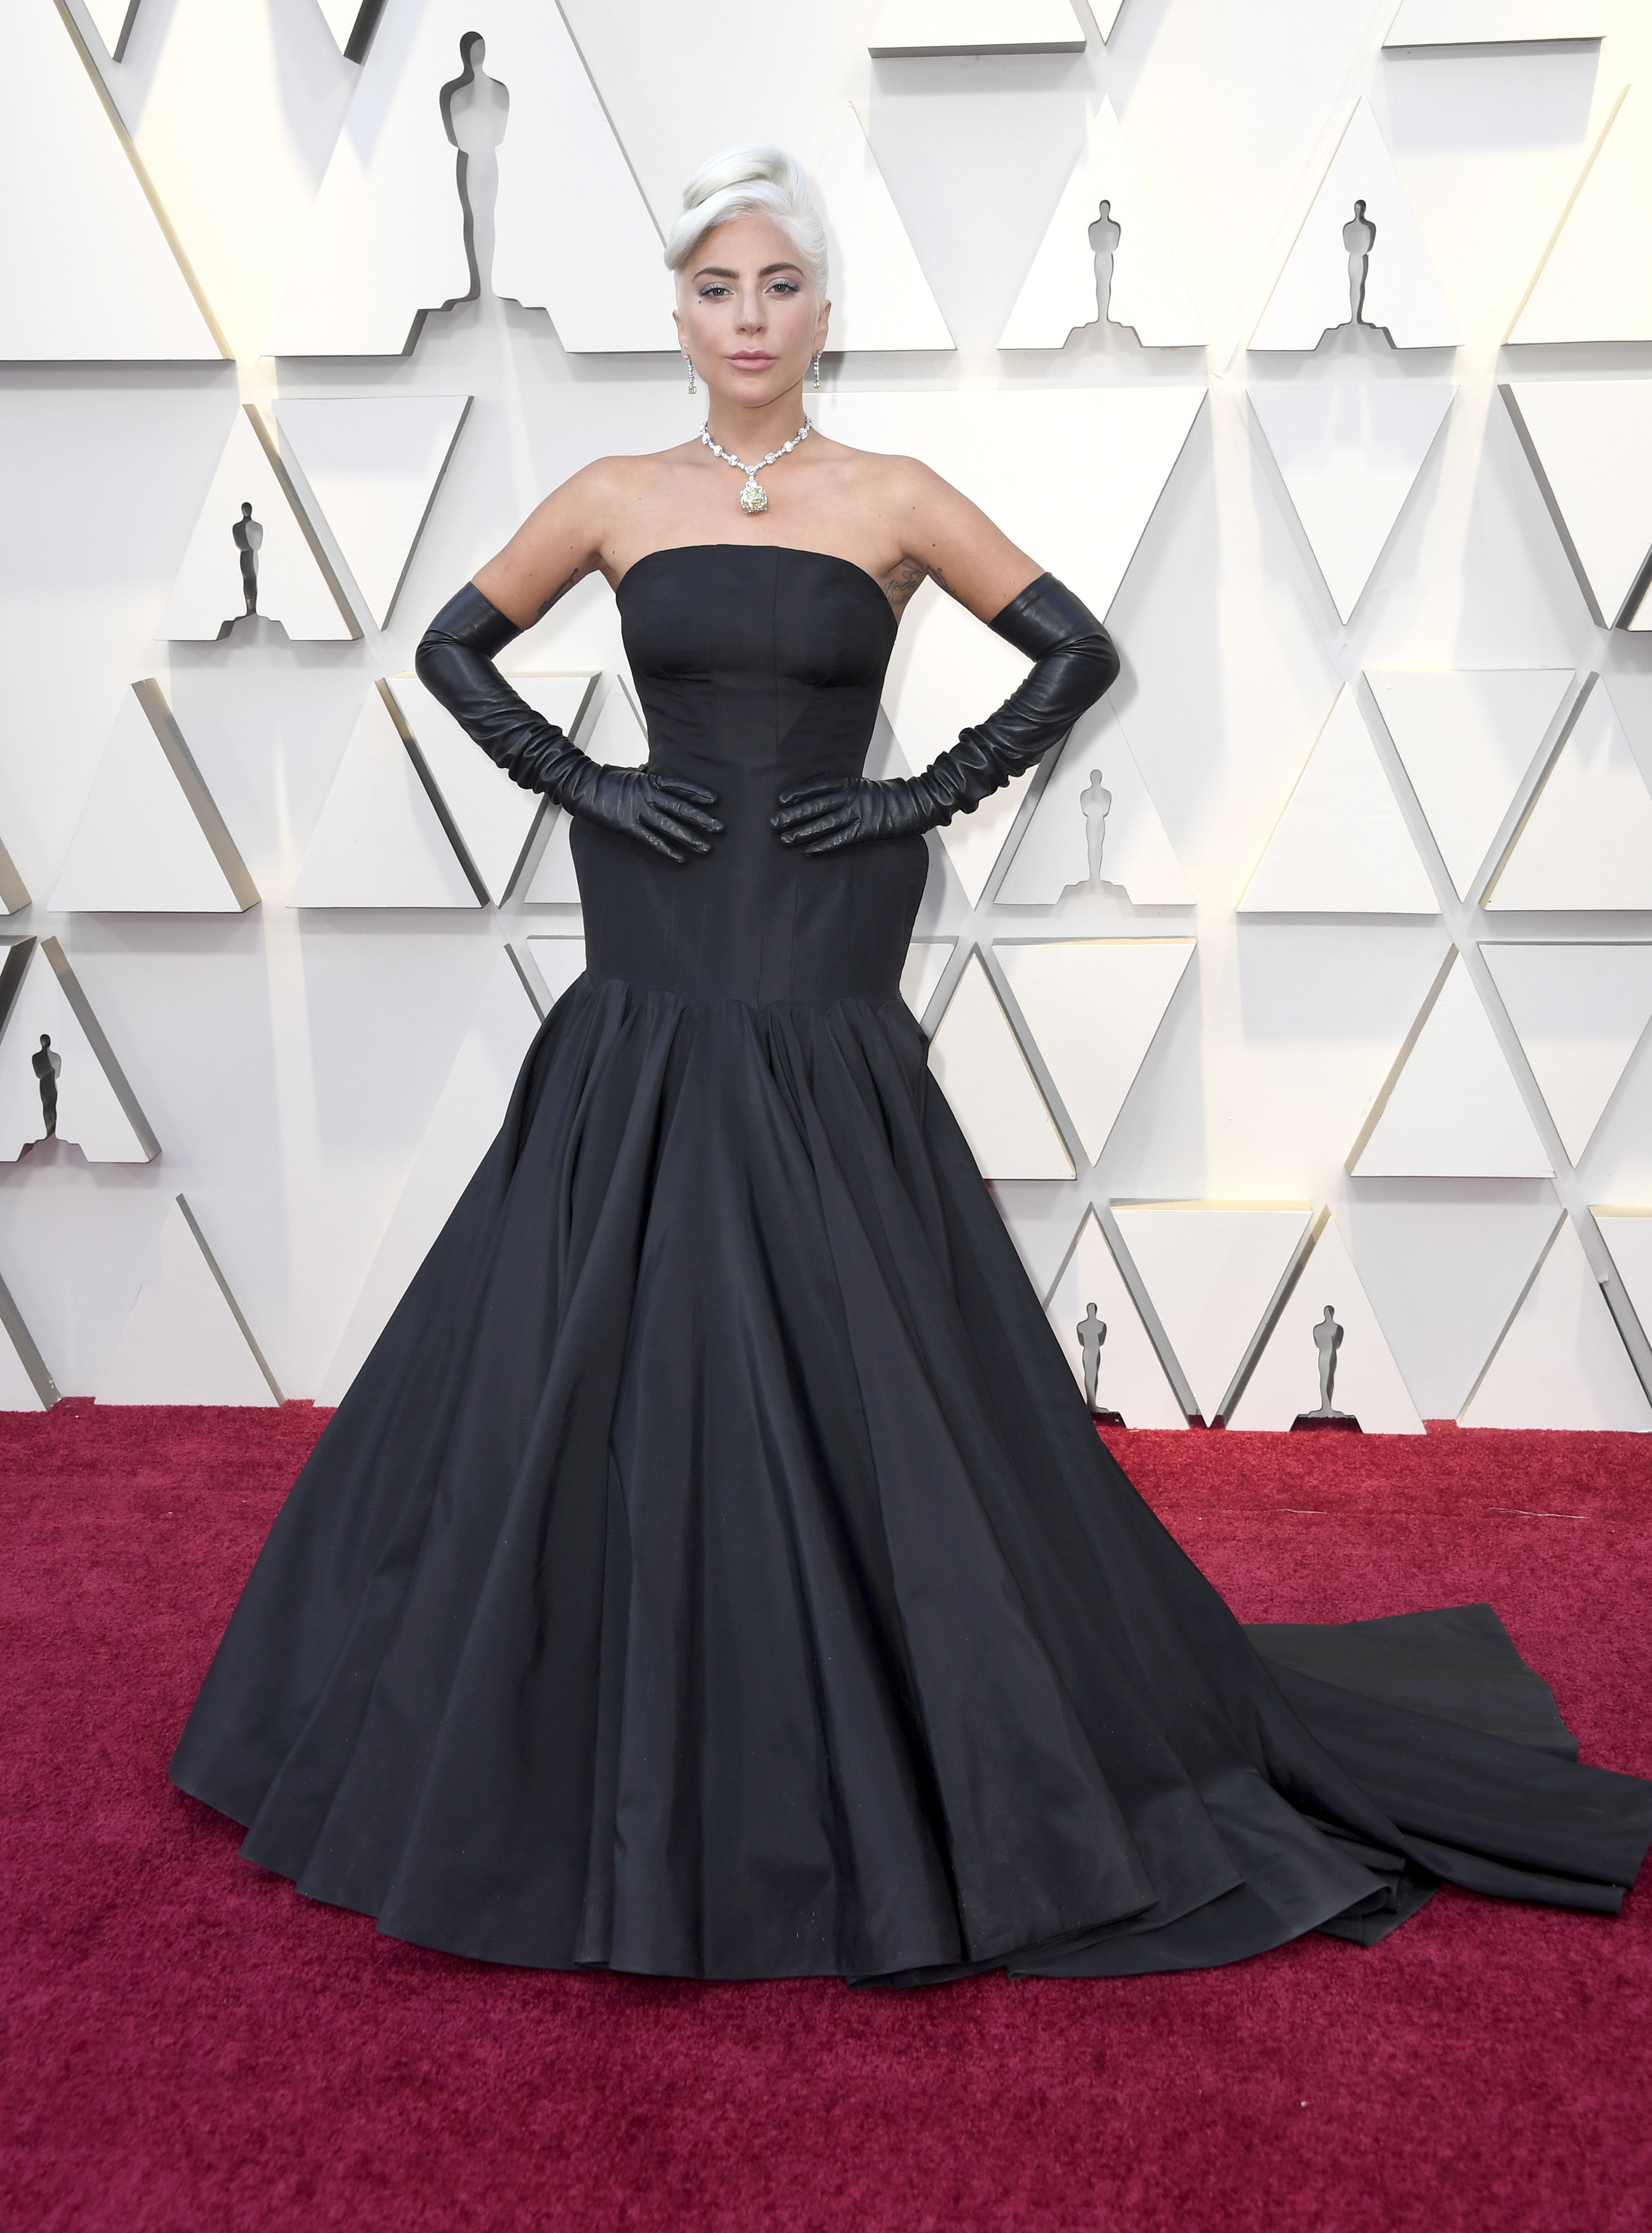 Lady Gaga wearing an all-black gown that looks very old Hollywood